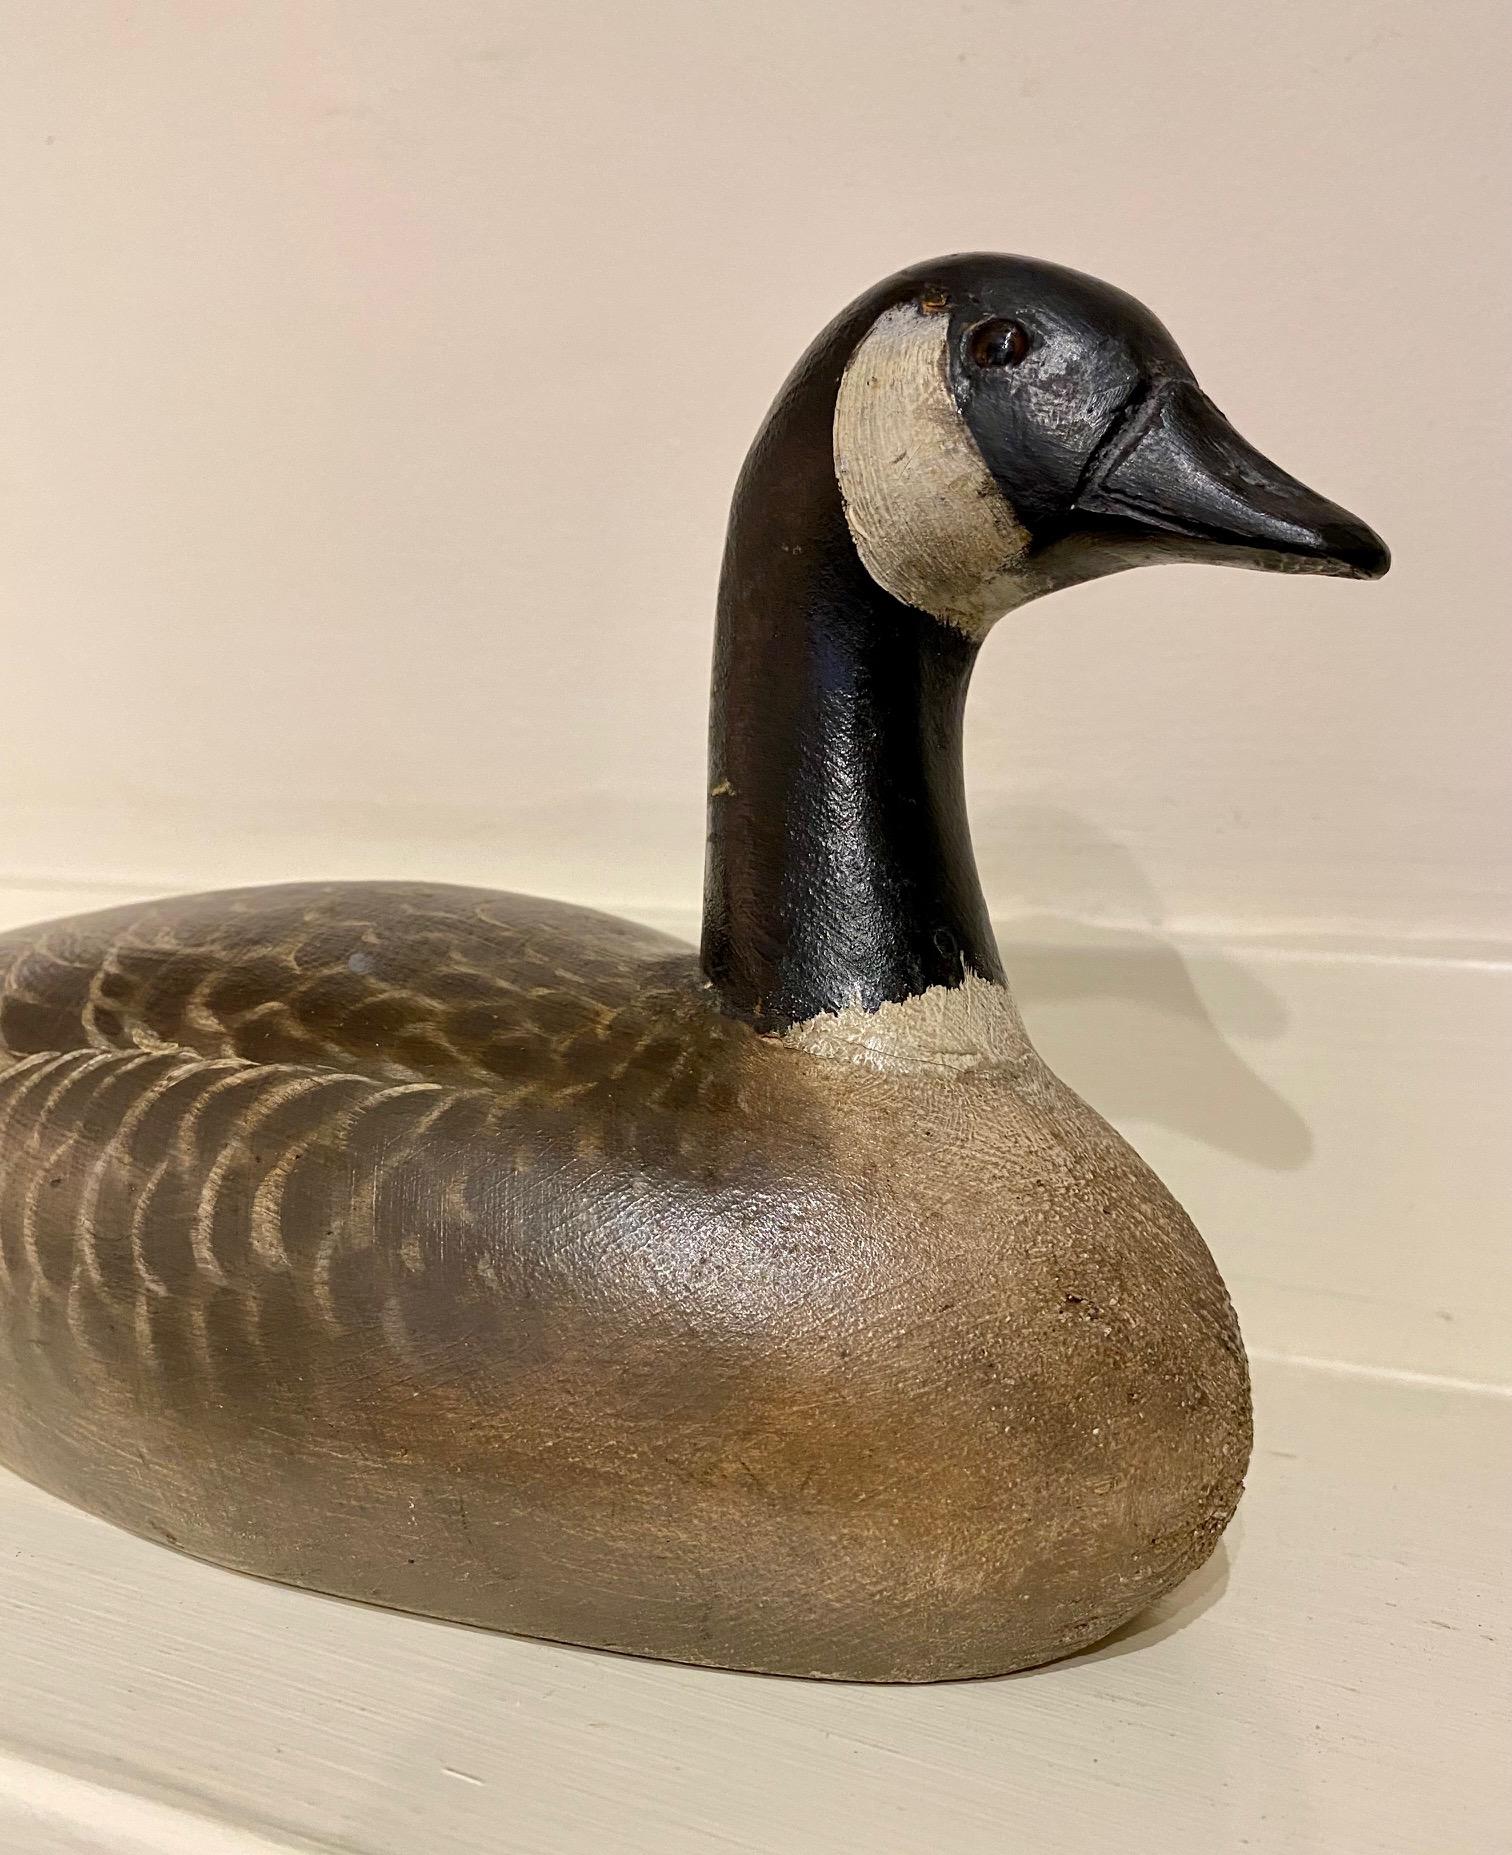 Antique Quarter Sized Canada Goose Decoy, by J.Elmer Crowell, East Harwich, MA (1862 - 1952), circa 1928 - 1943, a hand carved and painted diminutive Canada Goose goose decoy signed with Crowell's rectangular stamp on the bottom.

Strong original